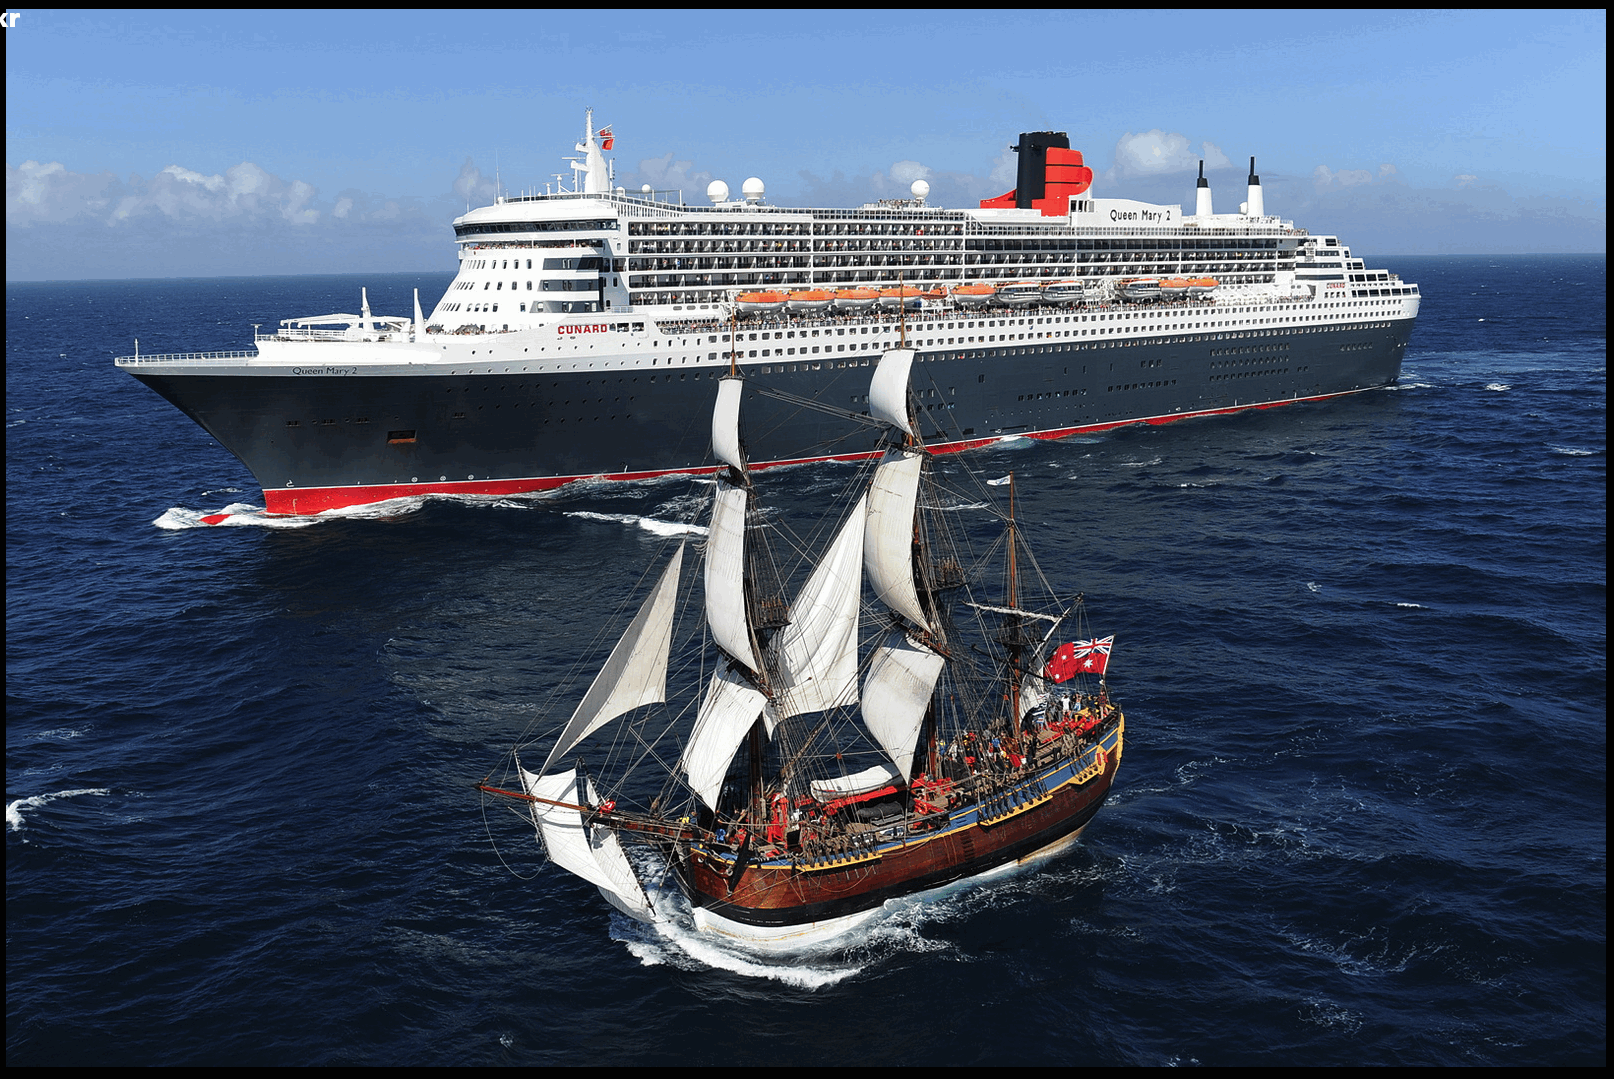 HMS Endeavour replica with RMS Queen Mary 2, 2013